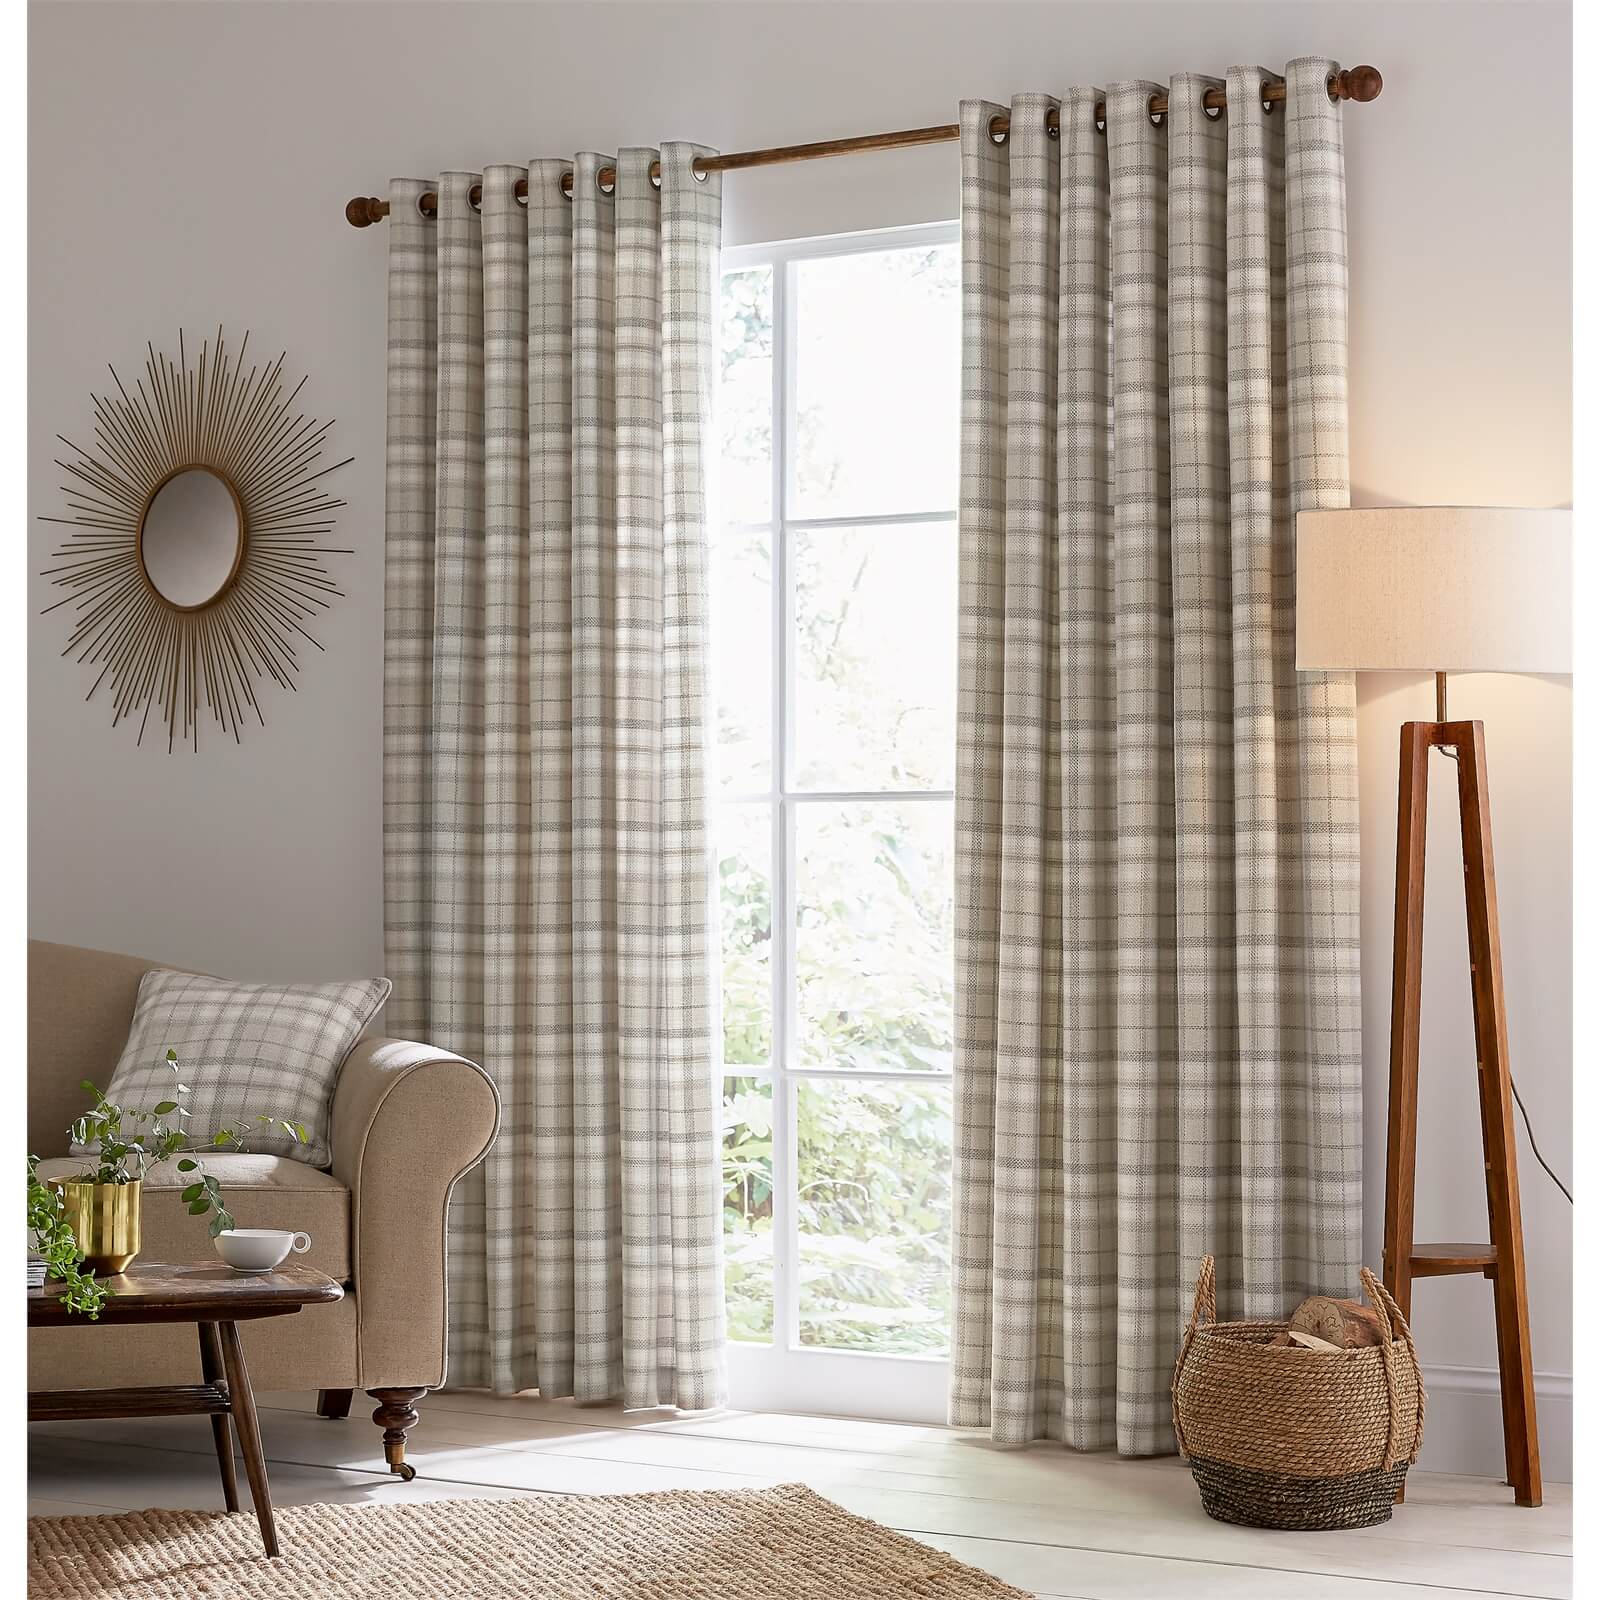 Helena Springfield Harriet Lined Curtains 90 x 72 - Taupe